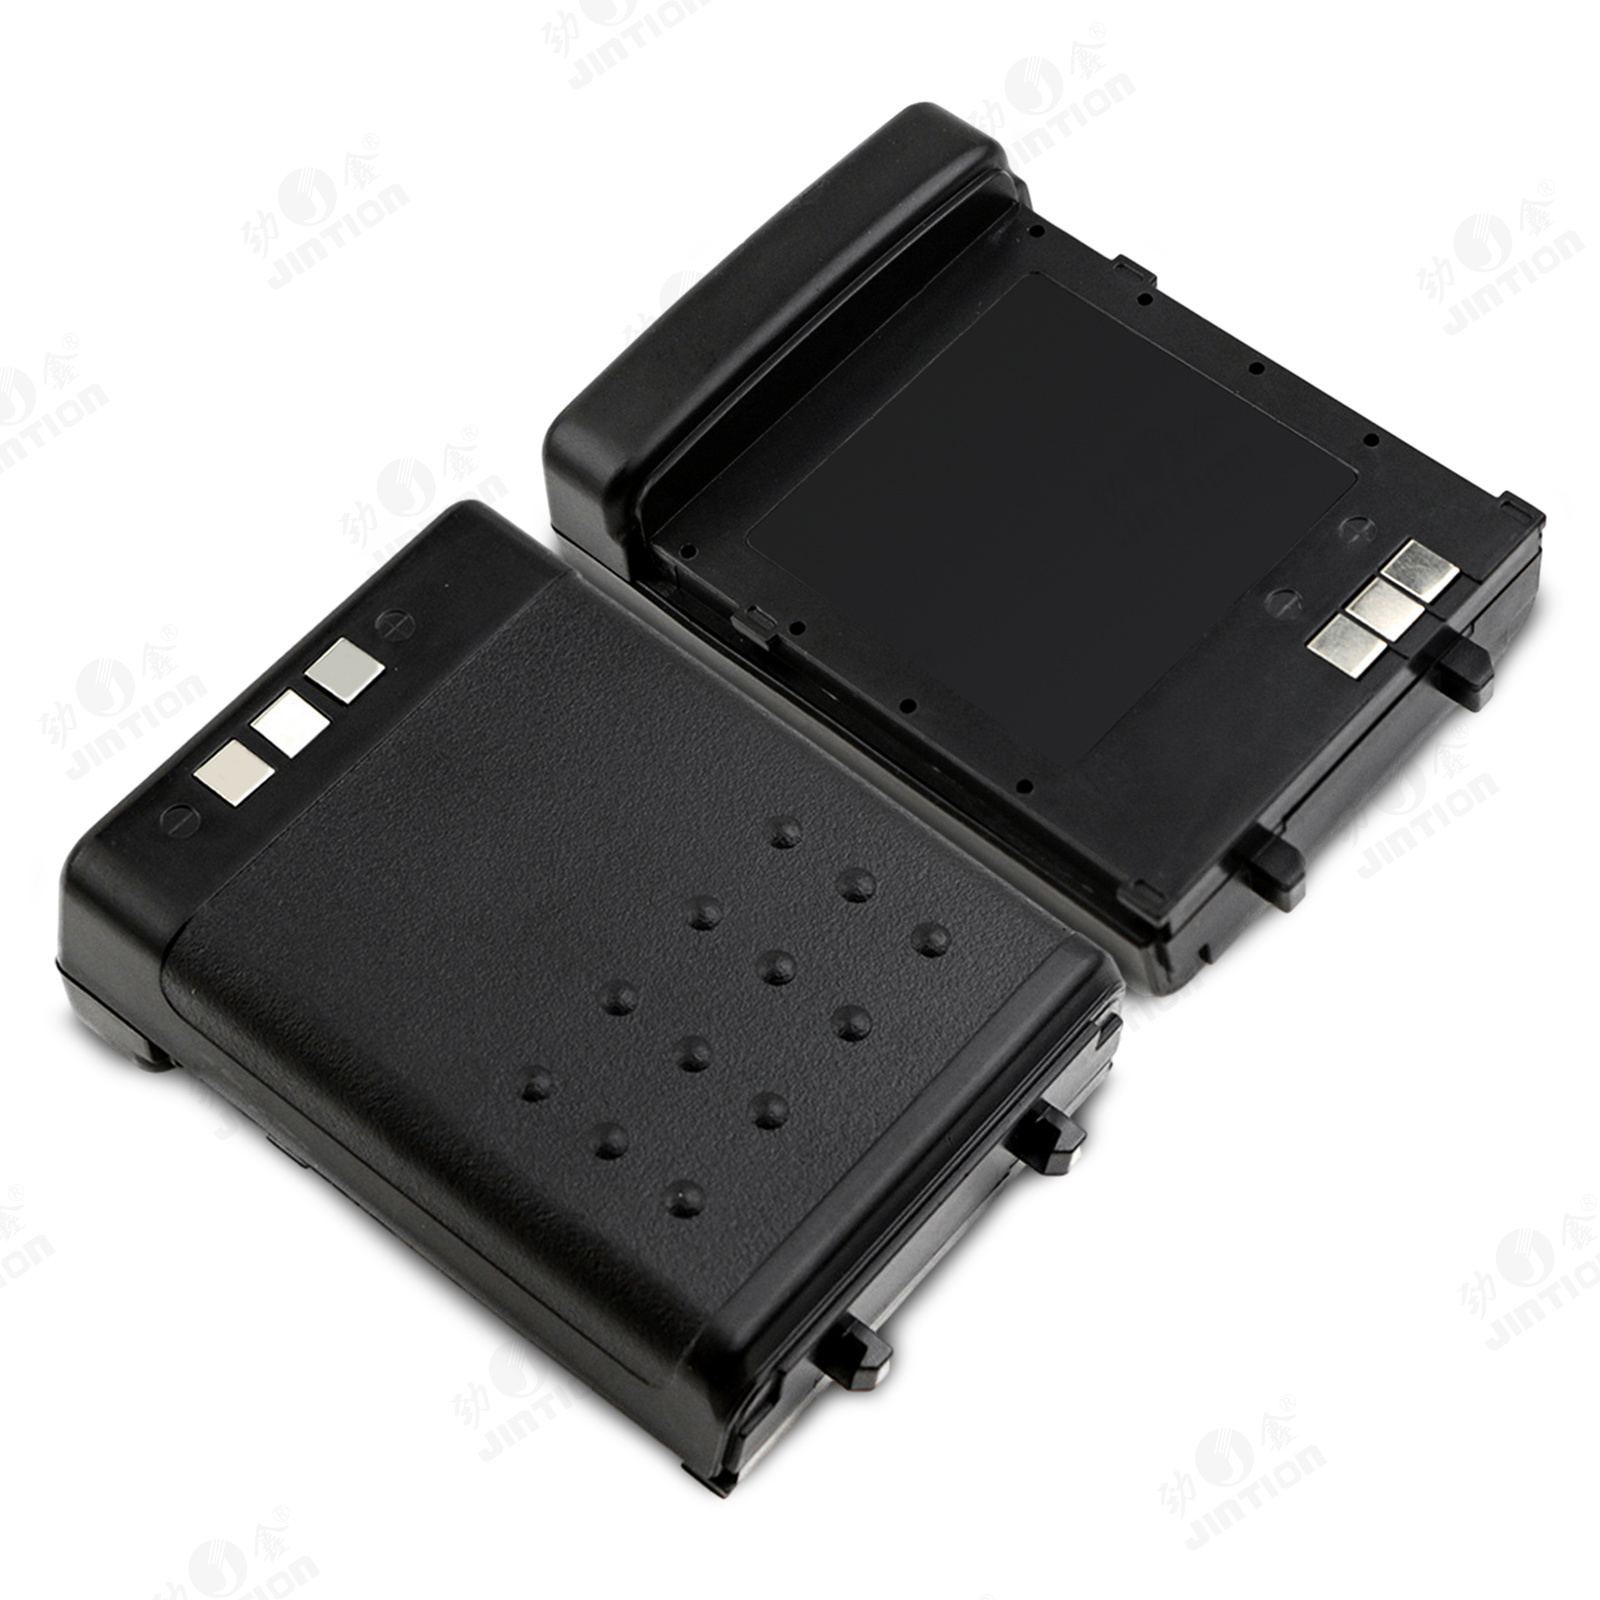 JINTION Icom BP-173 wo way radio battery pack walkie talkie battery for IC-T7A IC-T7H IC-T70